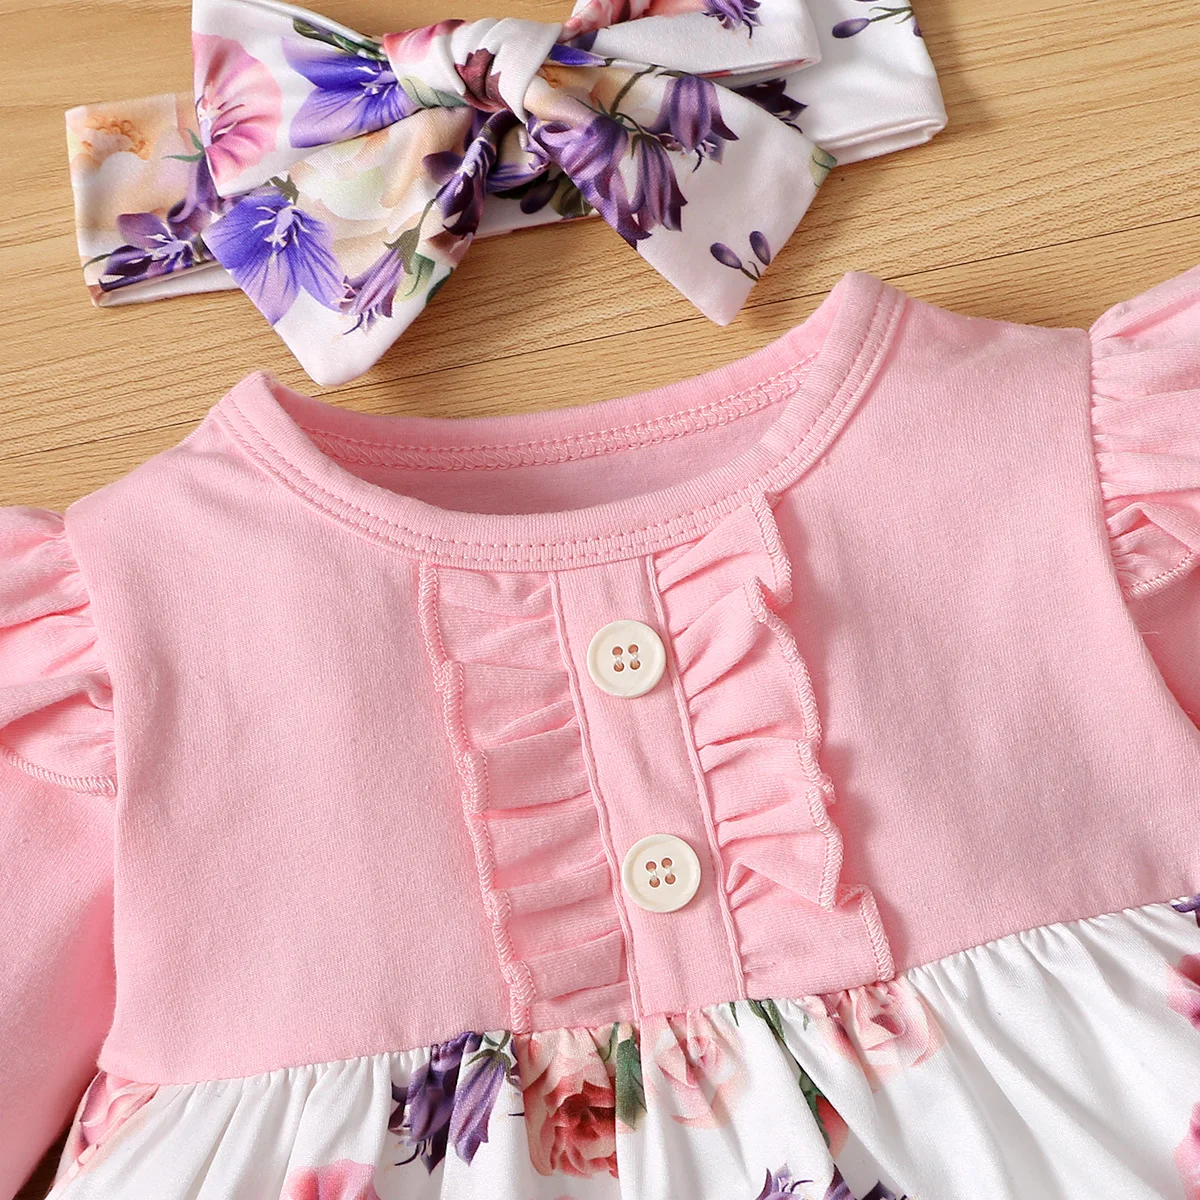 3-24M Fall Newborn Girl Clothing Baby Girl Clothes Set Infant Yellow Print Floral Bow Top + Pants Toddler Baby Girl Outfit warm Baby Clothing Set